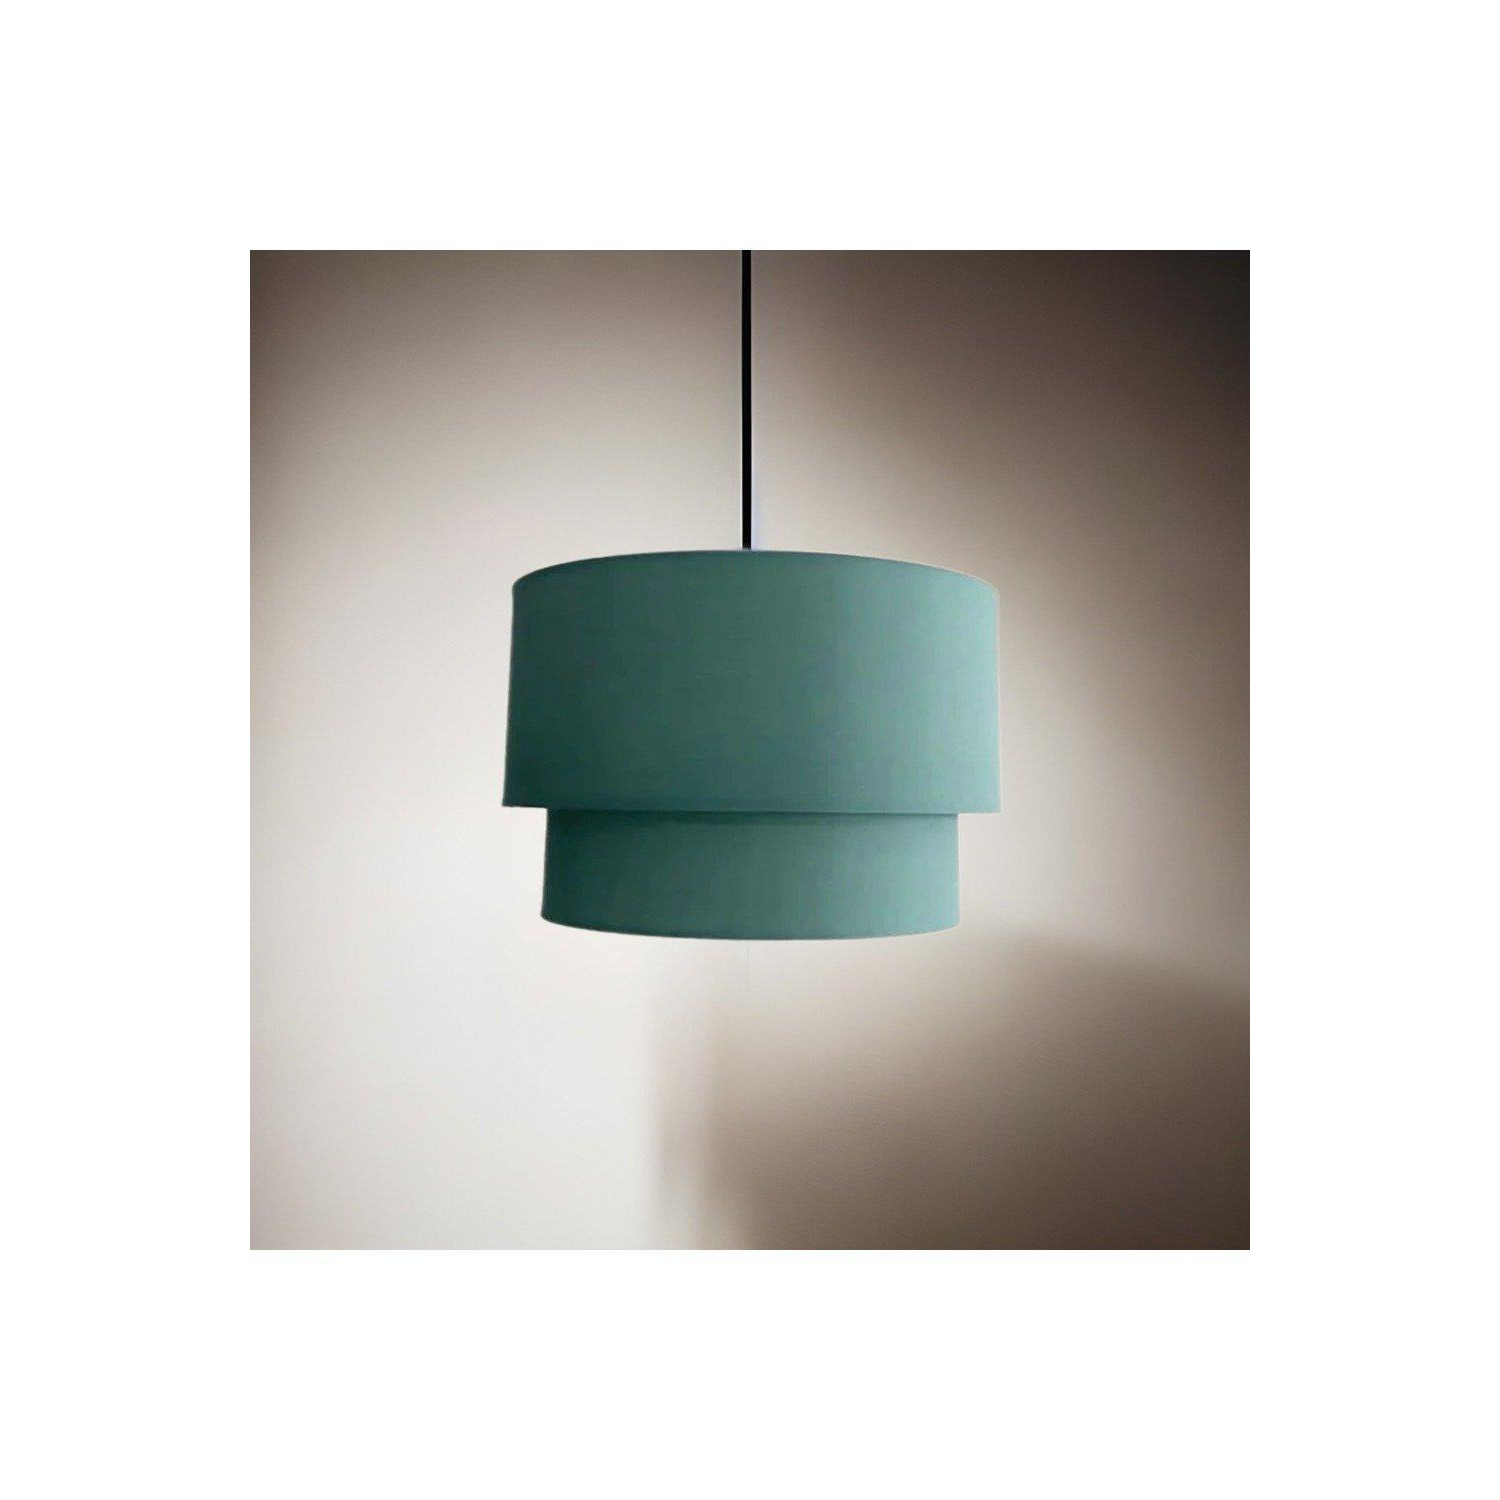 'Kimber' Teal & White Inner Two Tier Ceiling Shade - image 1